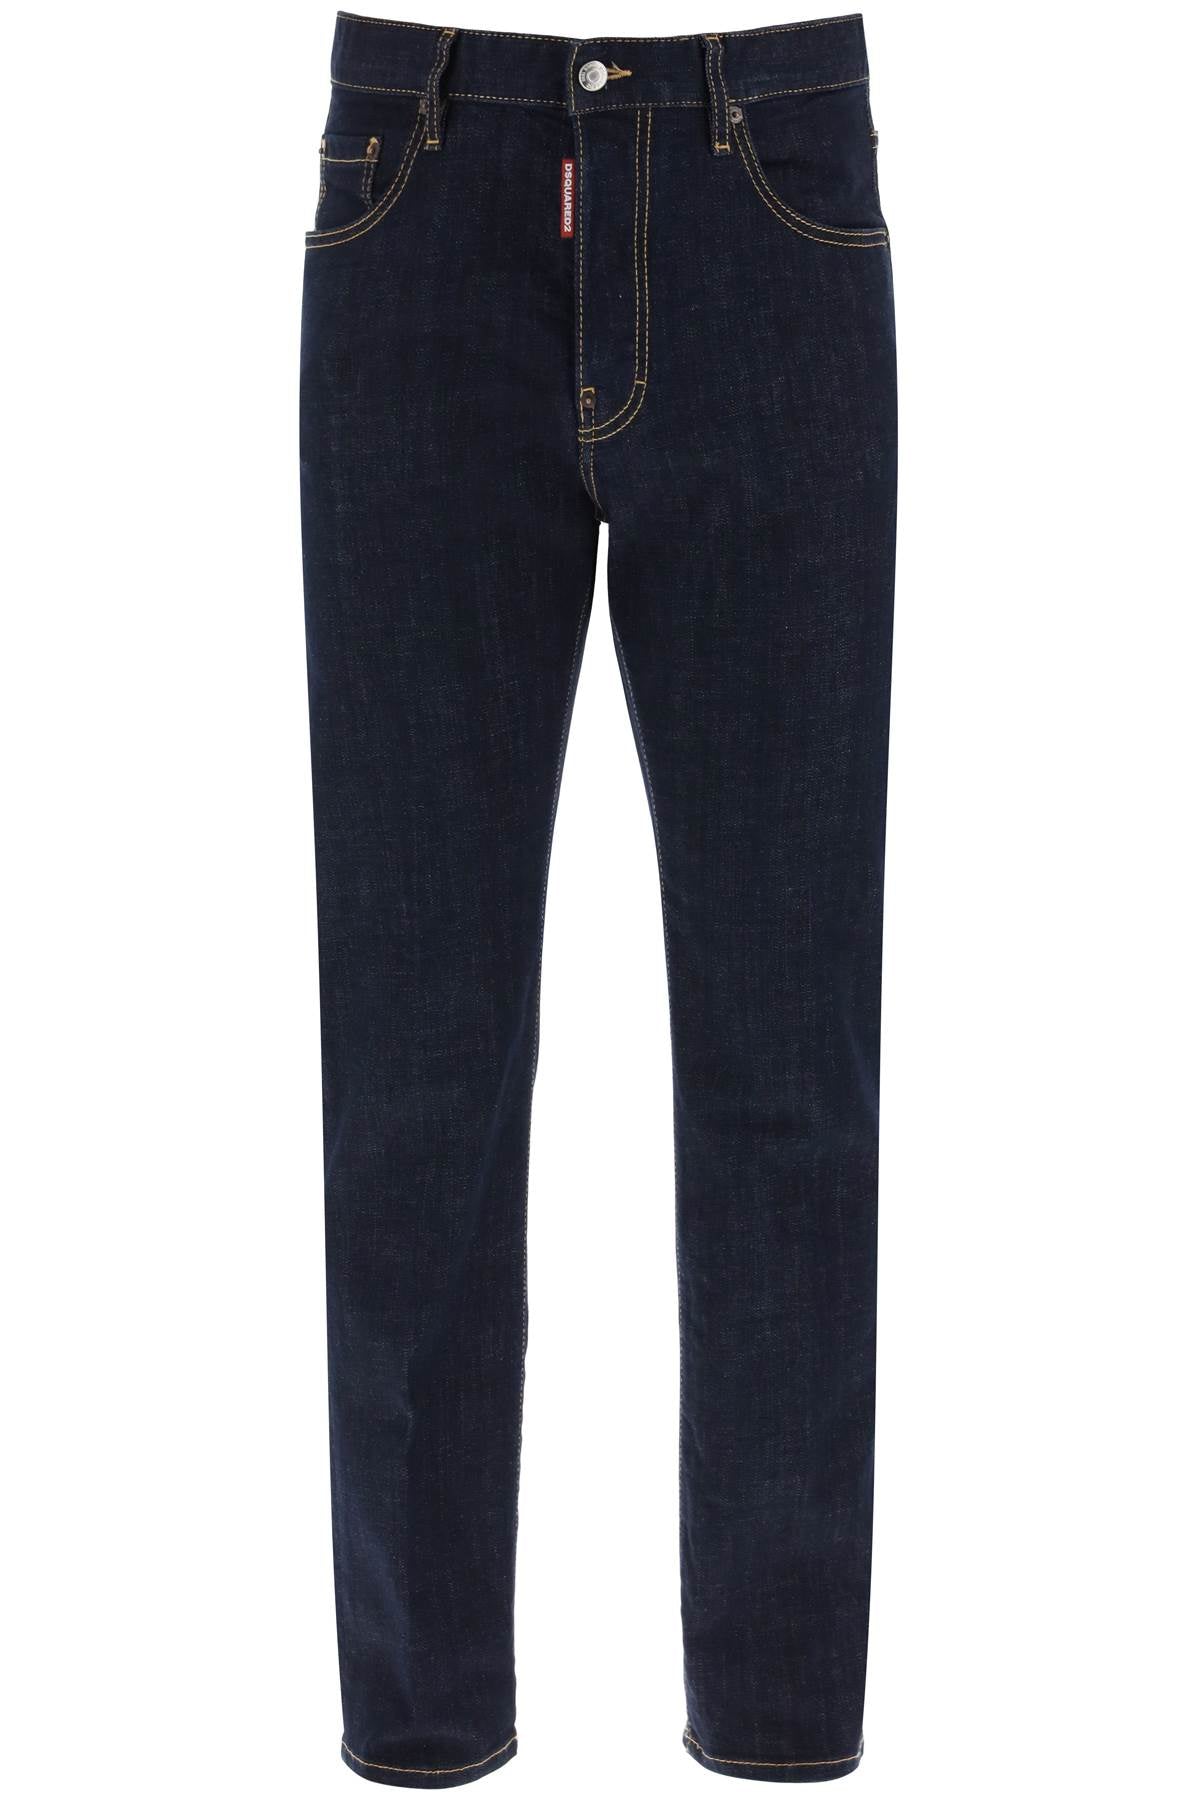 Dsquared2 642 jeans in dark rinse wash-0